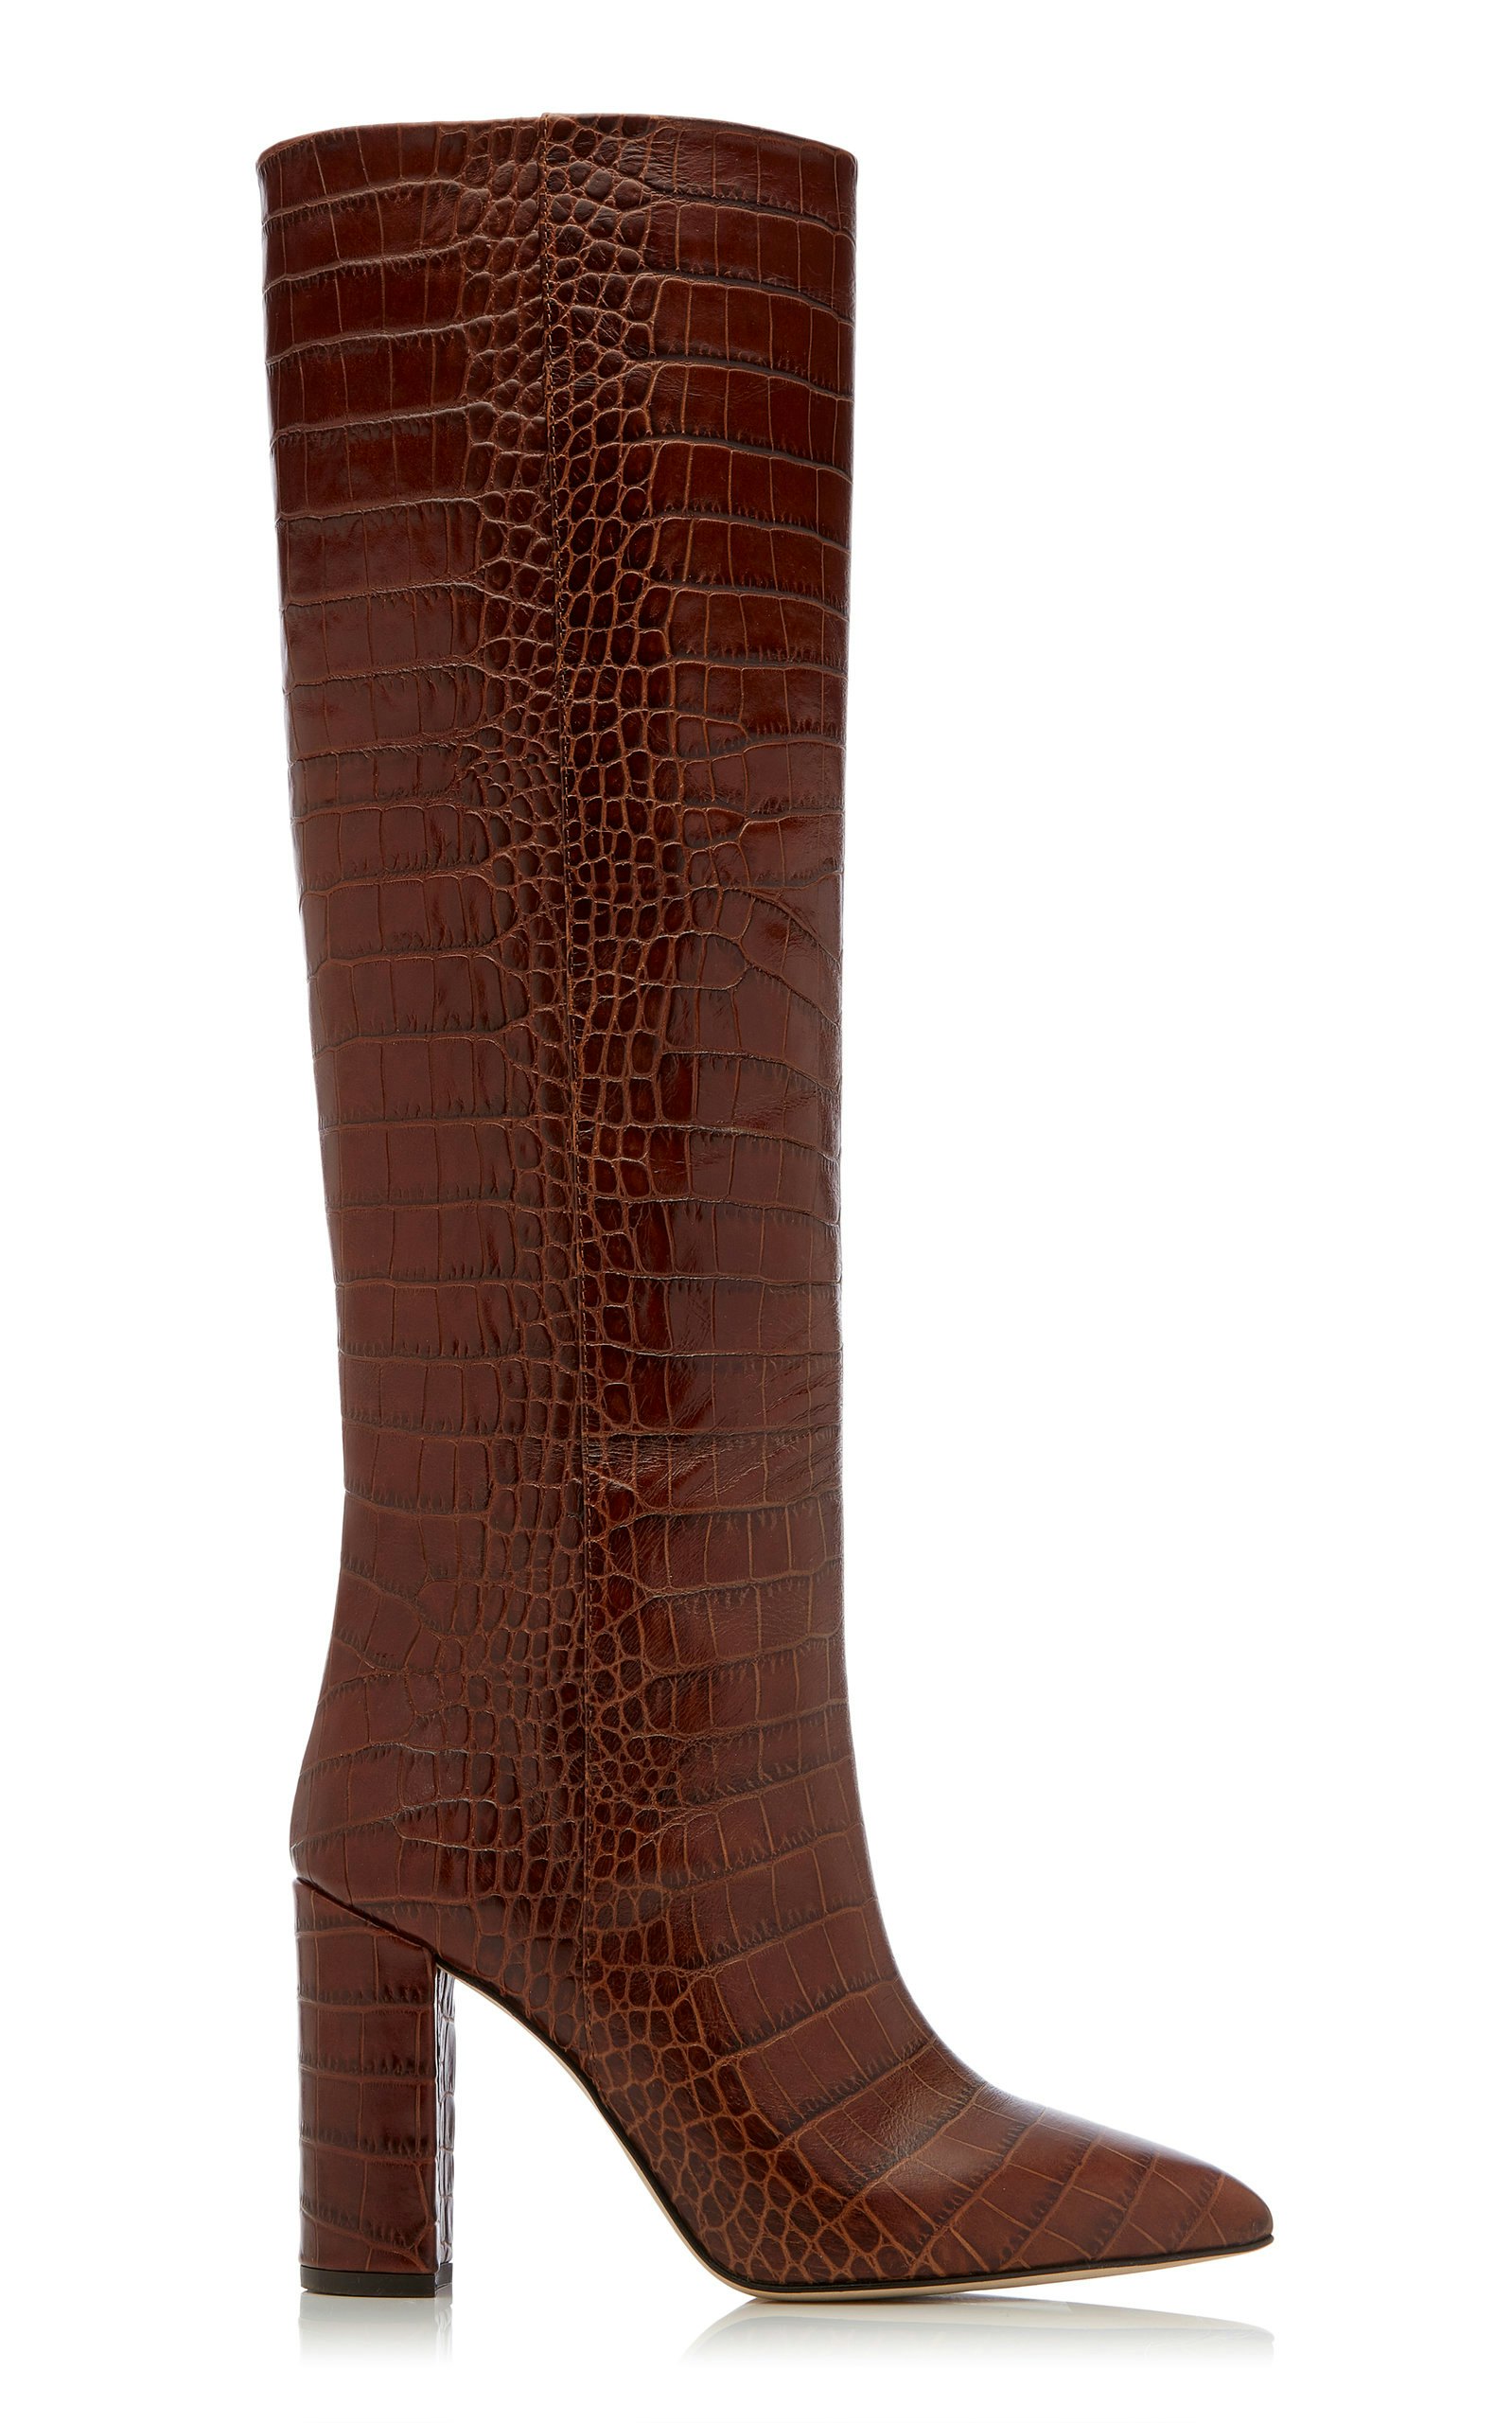 chocolate colored boots